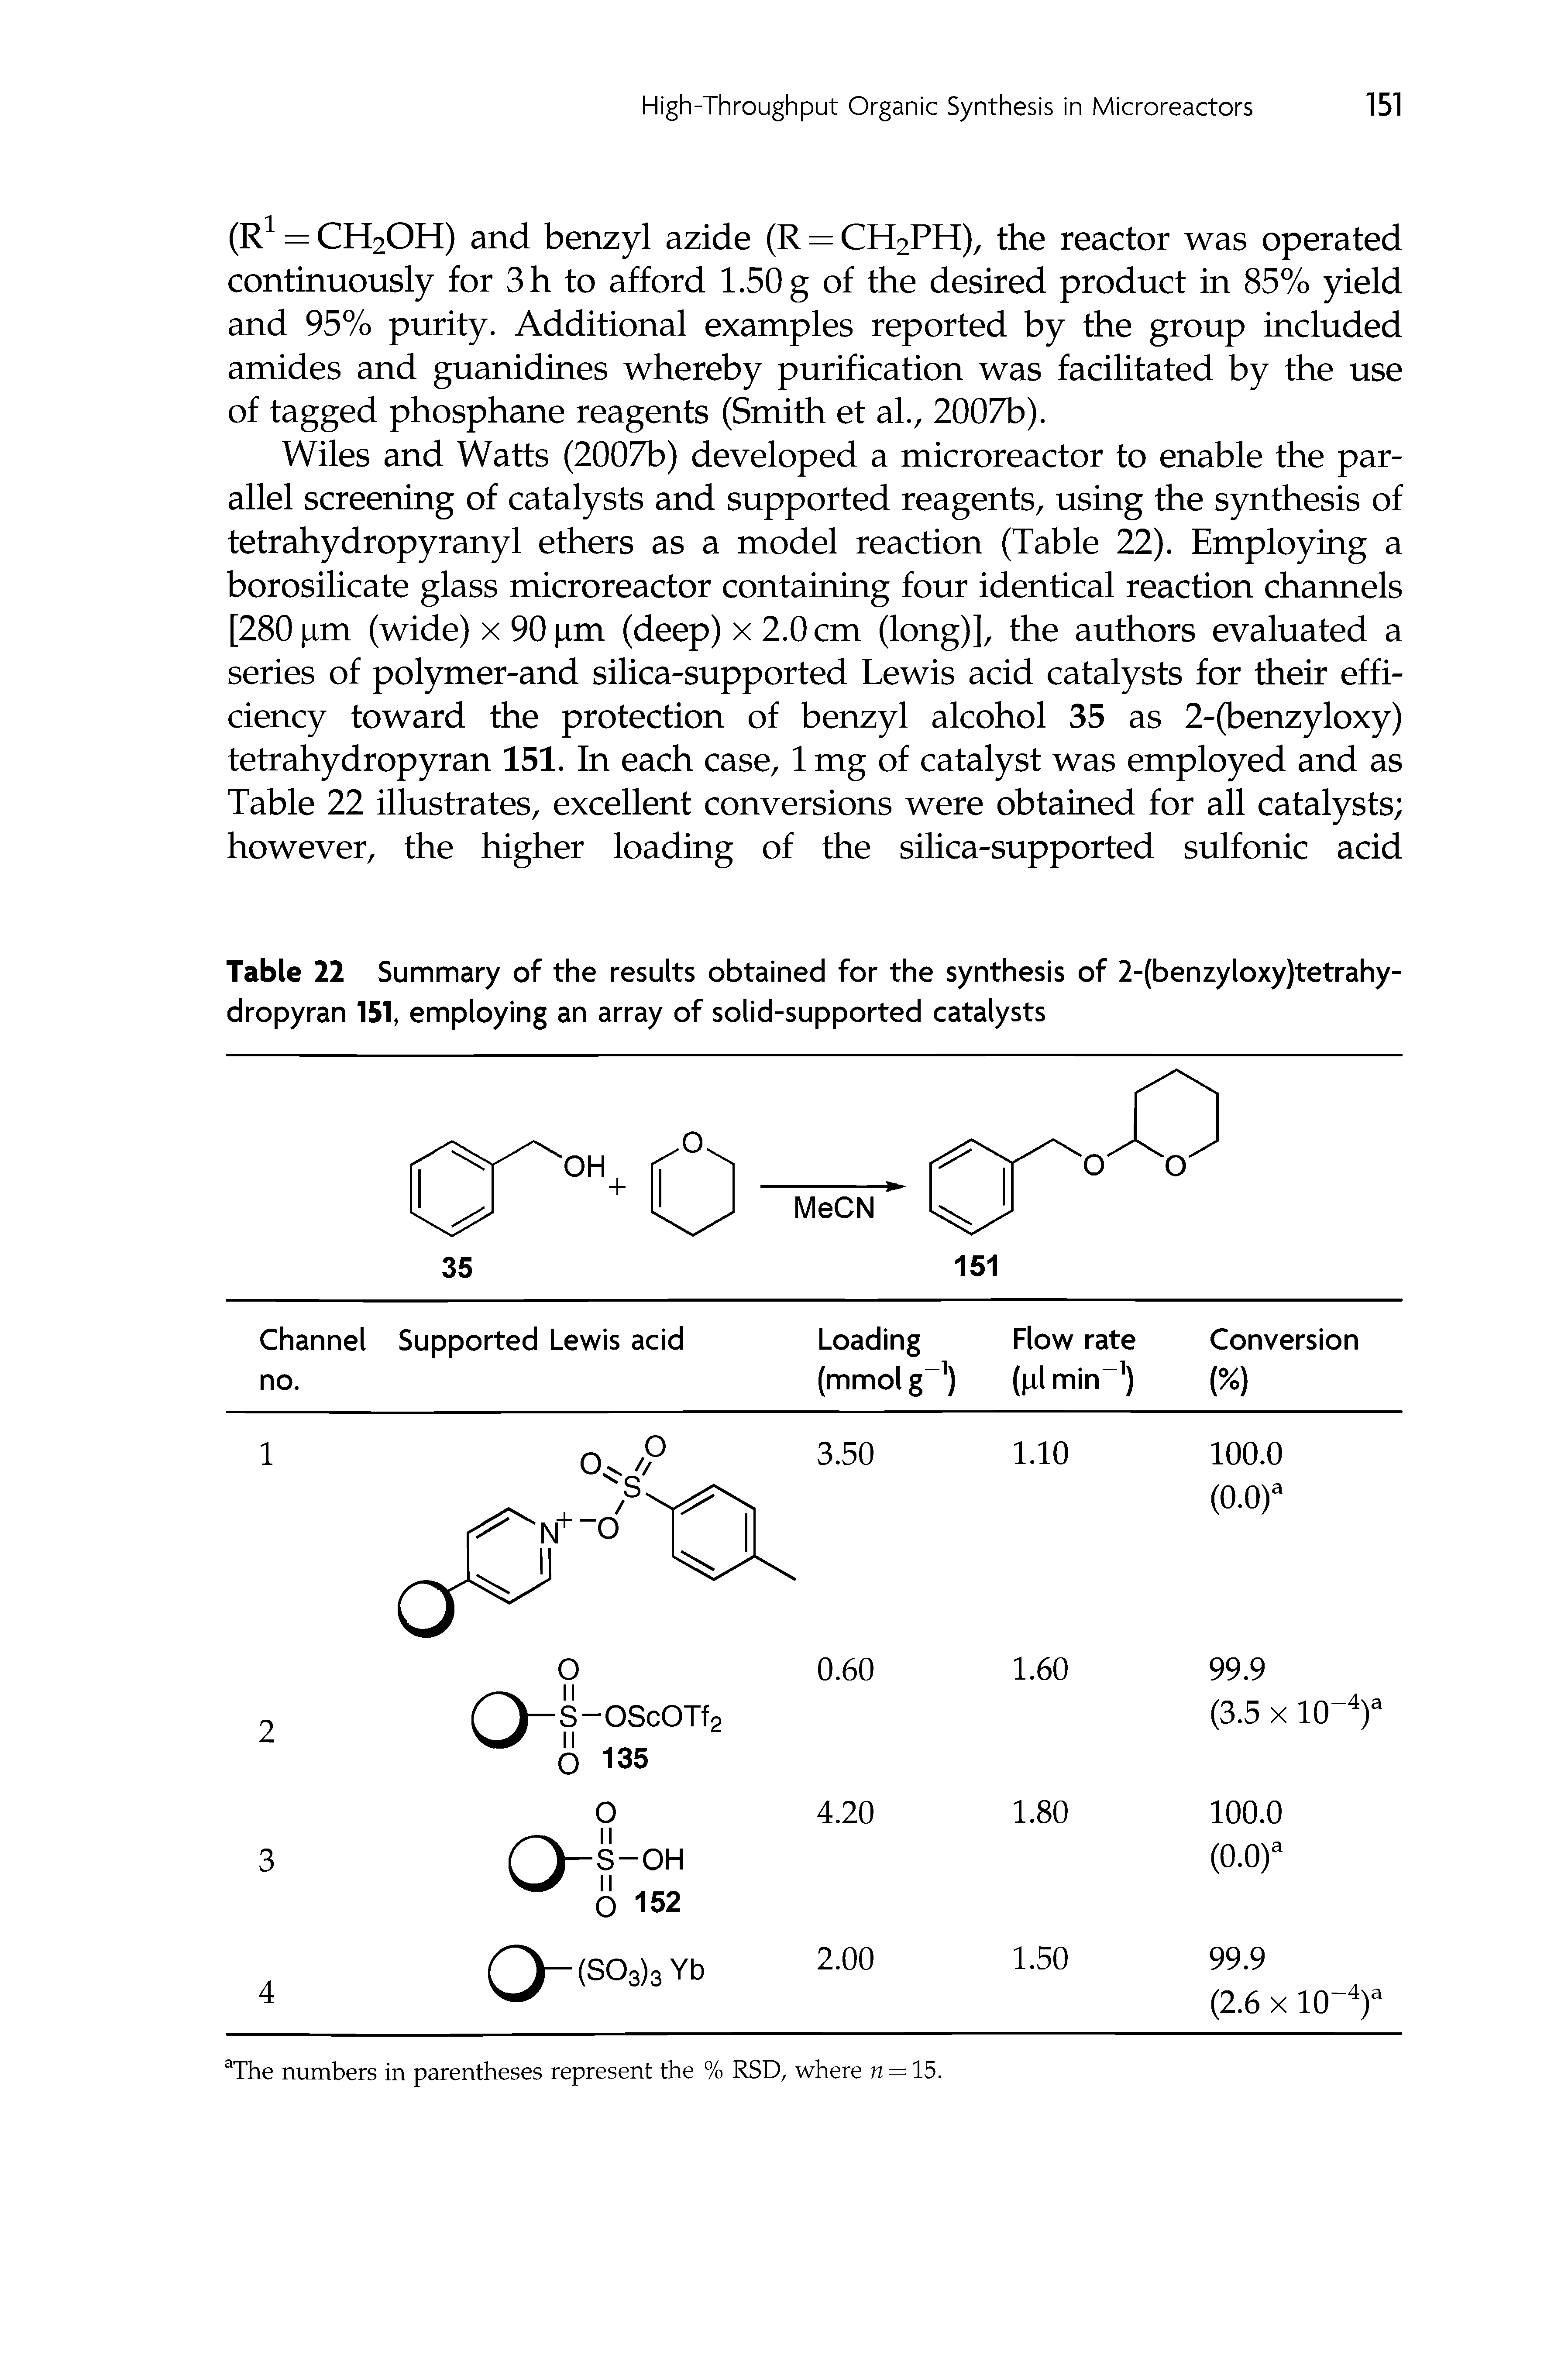 Table 22 Summary of the results obtained for the synthesis of 2-(benzyloxy)tetrahy-dropyran 151, employing an array of solid-supported catalysts...